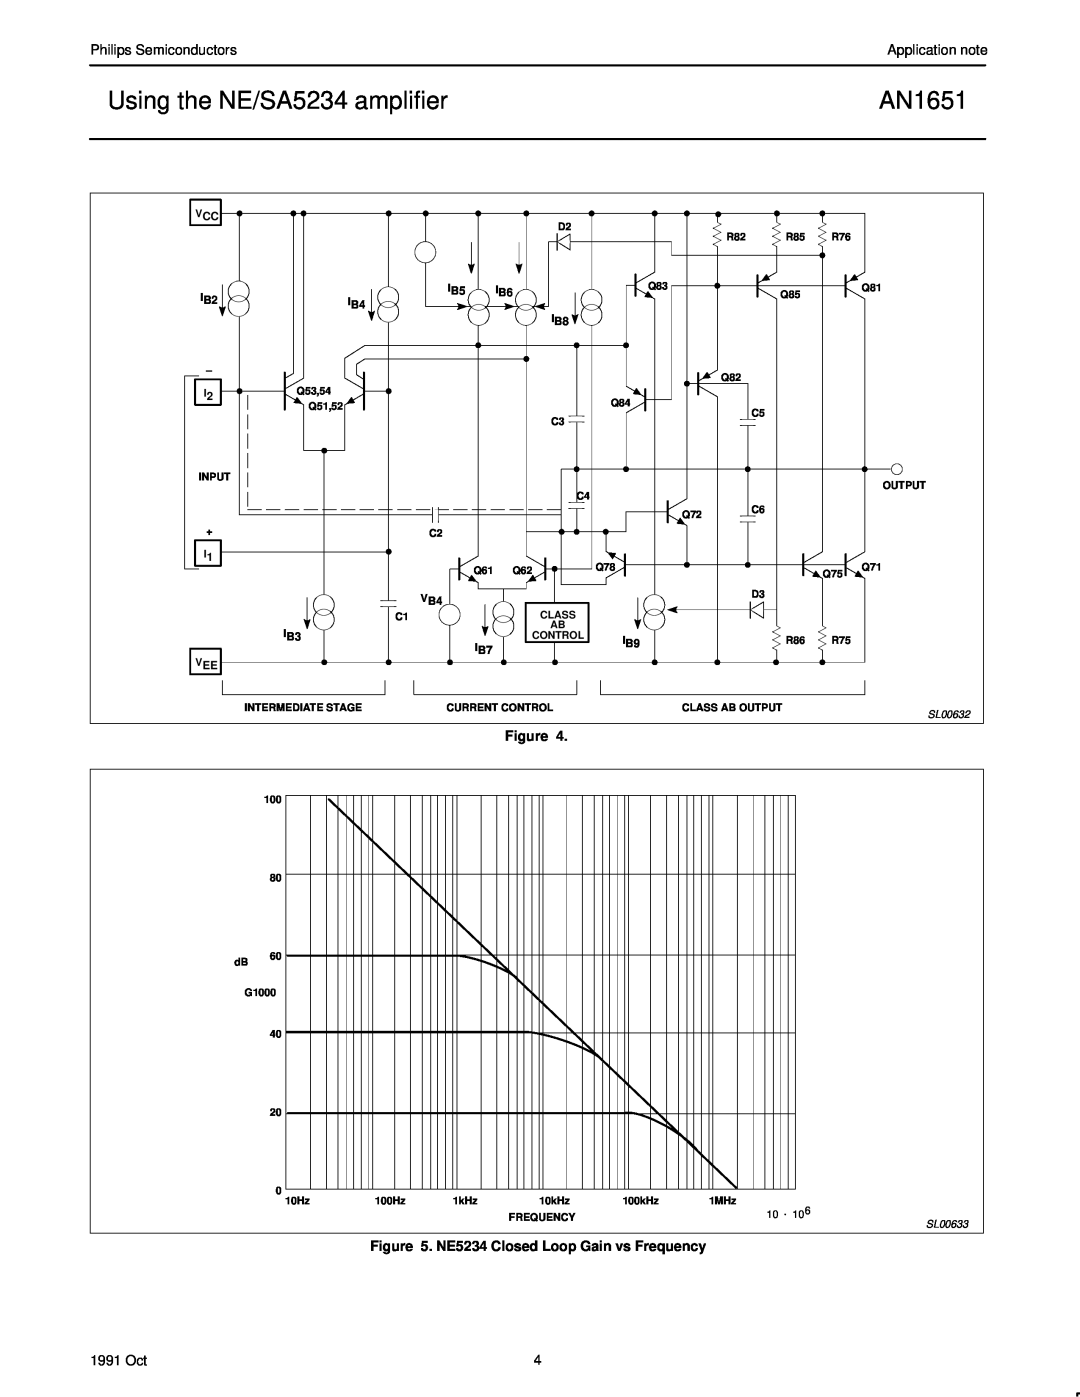 Philips AN1651 manual NE5234 Closed Loop Gain vs Frequency, Using the NE/SA5234 amplifier, Philips Semiconductors, 1991 Oct 